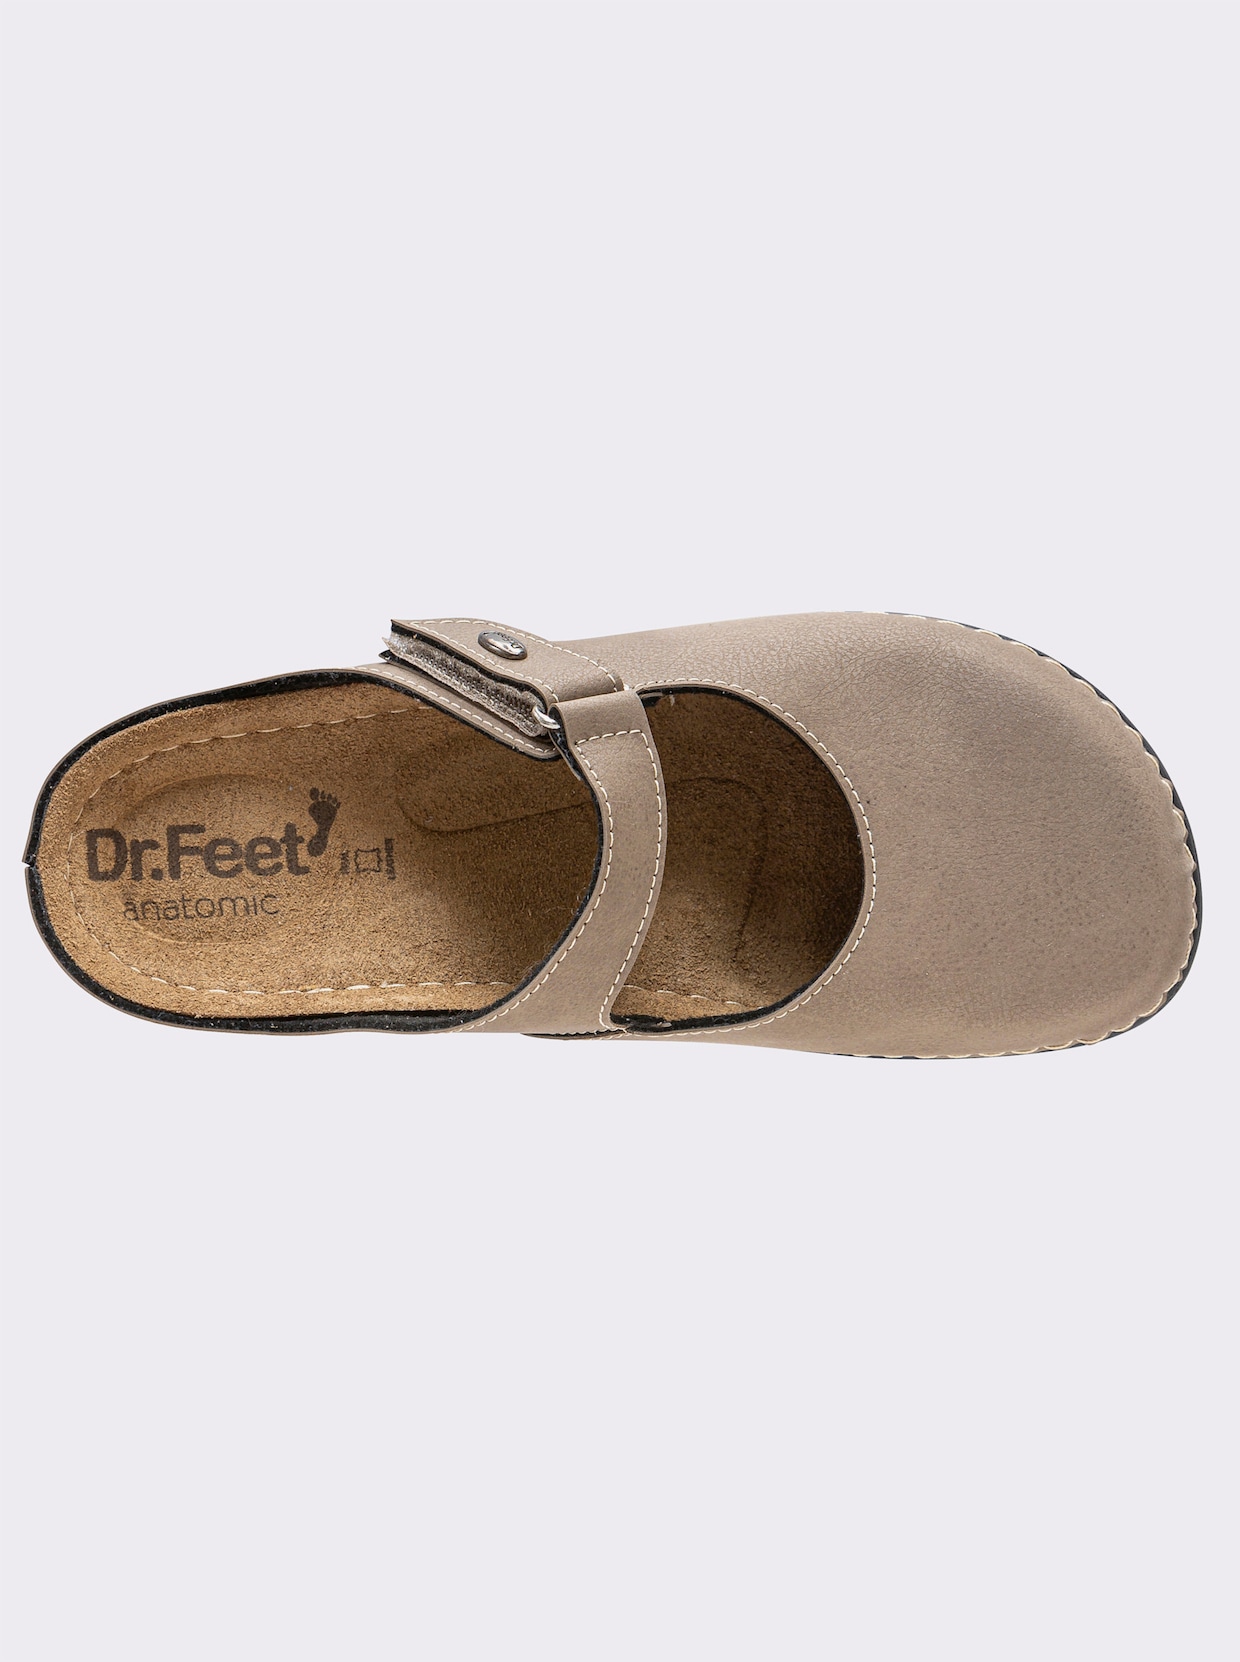 Dr. Feet Slippers - taupe